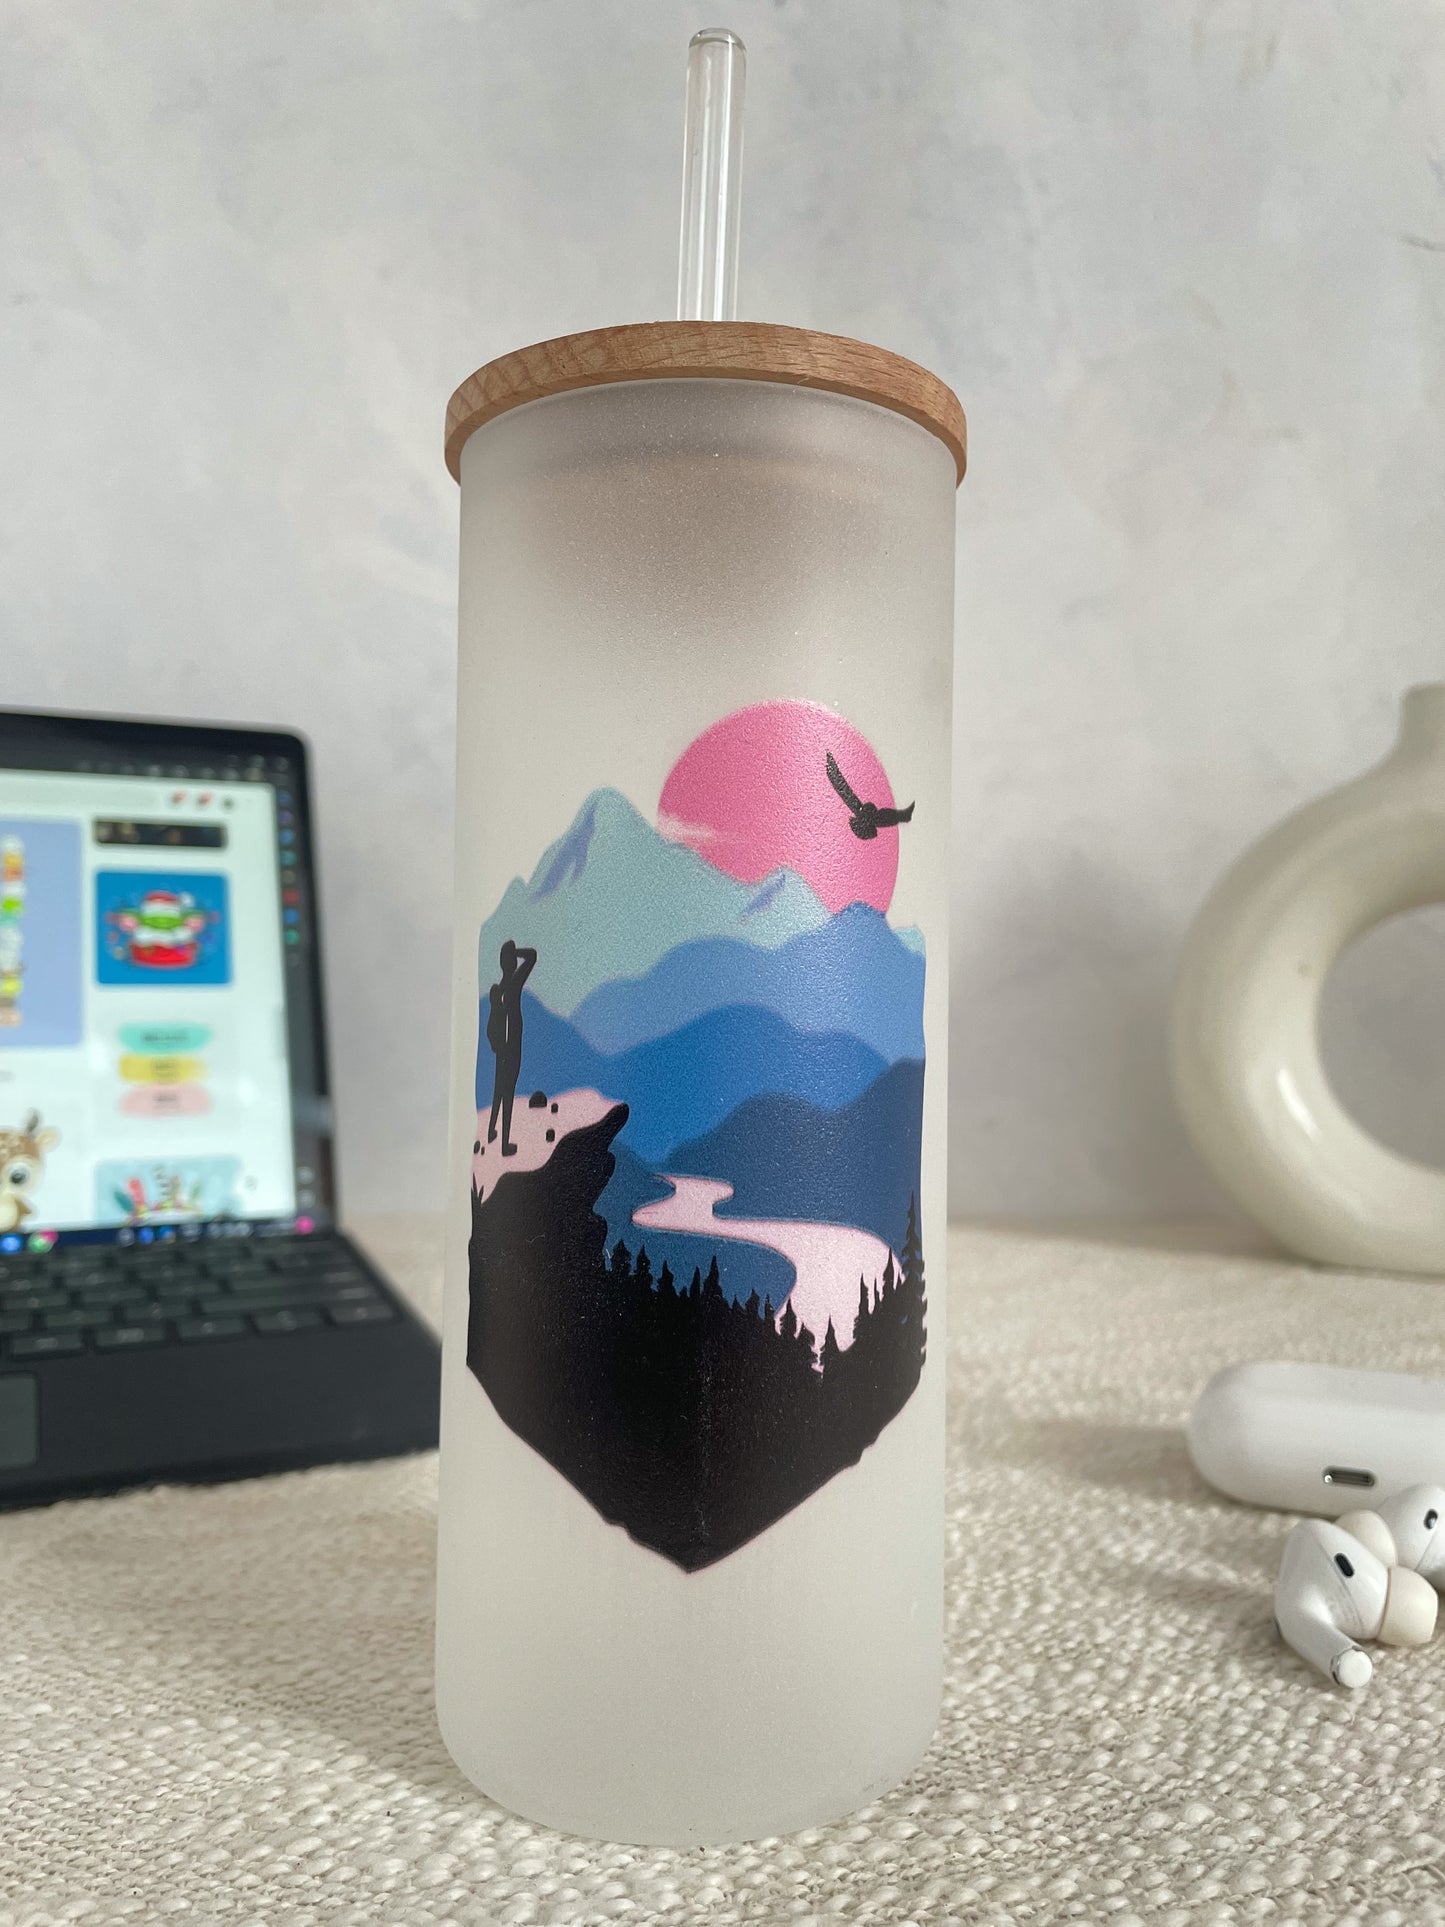 Frosted Grande Sipper 650ml| Heart In Mountain Print| 20oz Tall Tumbler with Straw and Lid